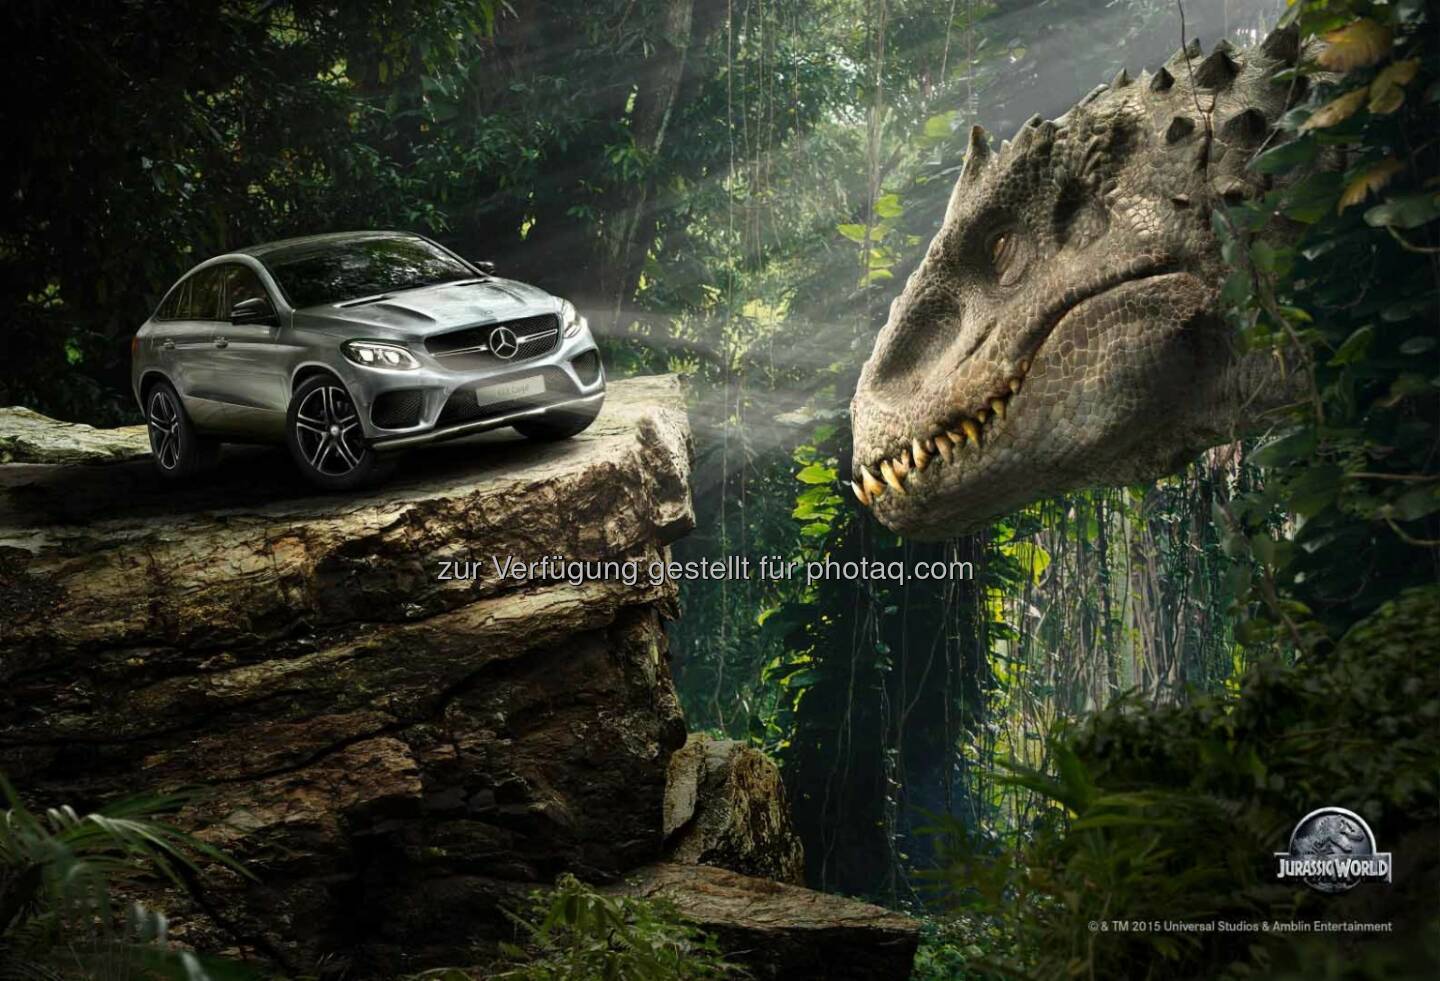 Mercedes-Benz in Universal Pictures’ and Amblin Entertainment’s Jurassic World: Das neue GLE Coupé  in Jurassic World 